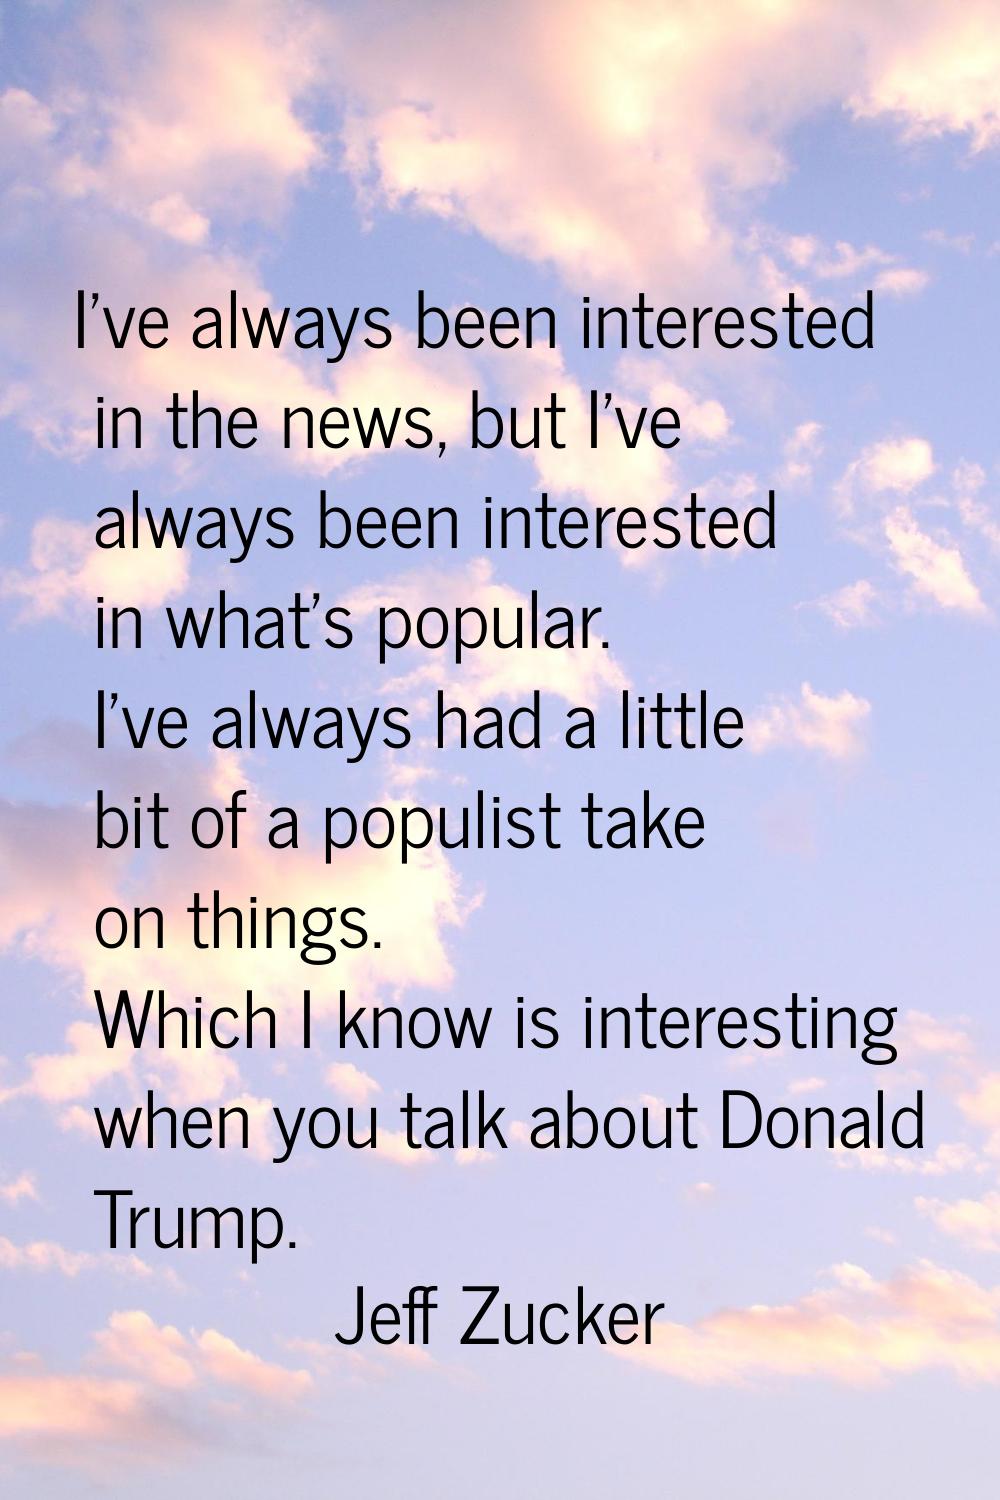 I've always been interested in the news, but I've always been interested in what's popular. I've al